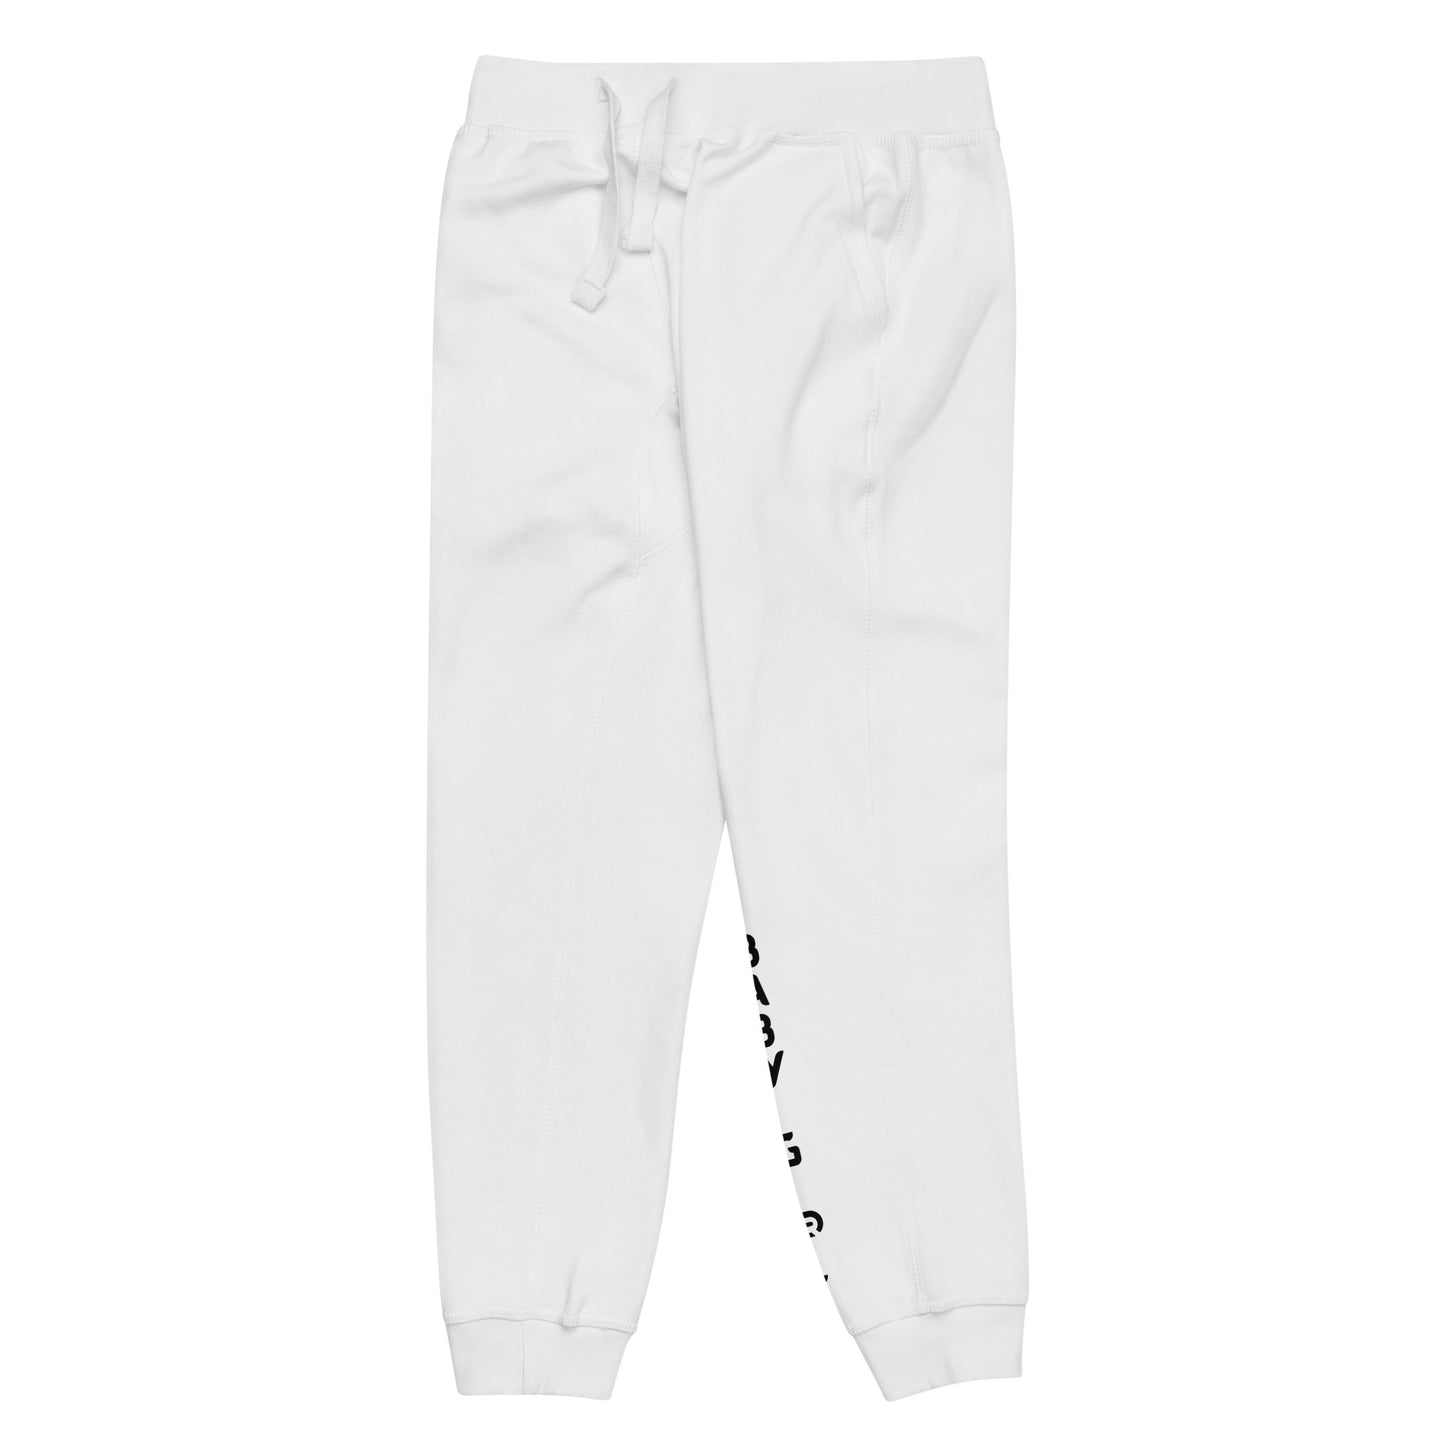 Red Weapon Baby Girl Whiteout Fleece Sweatpants